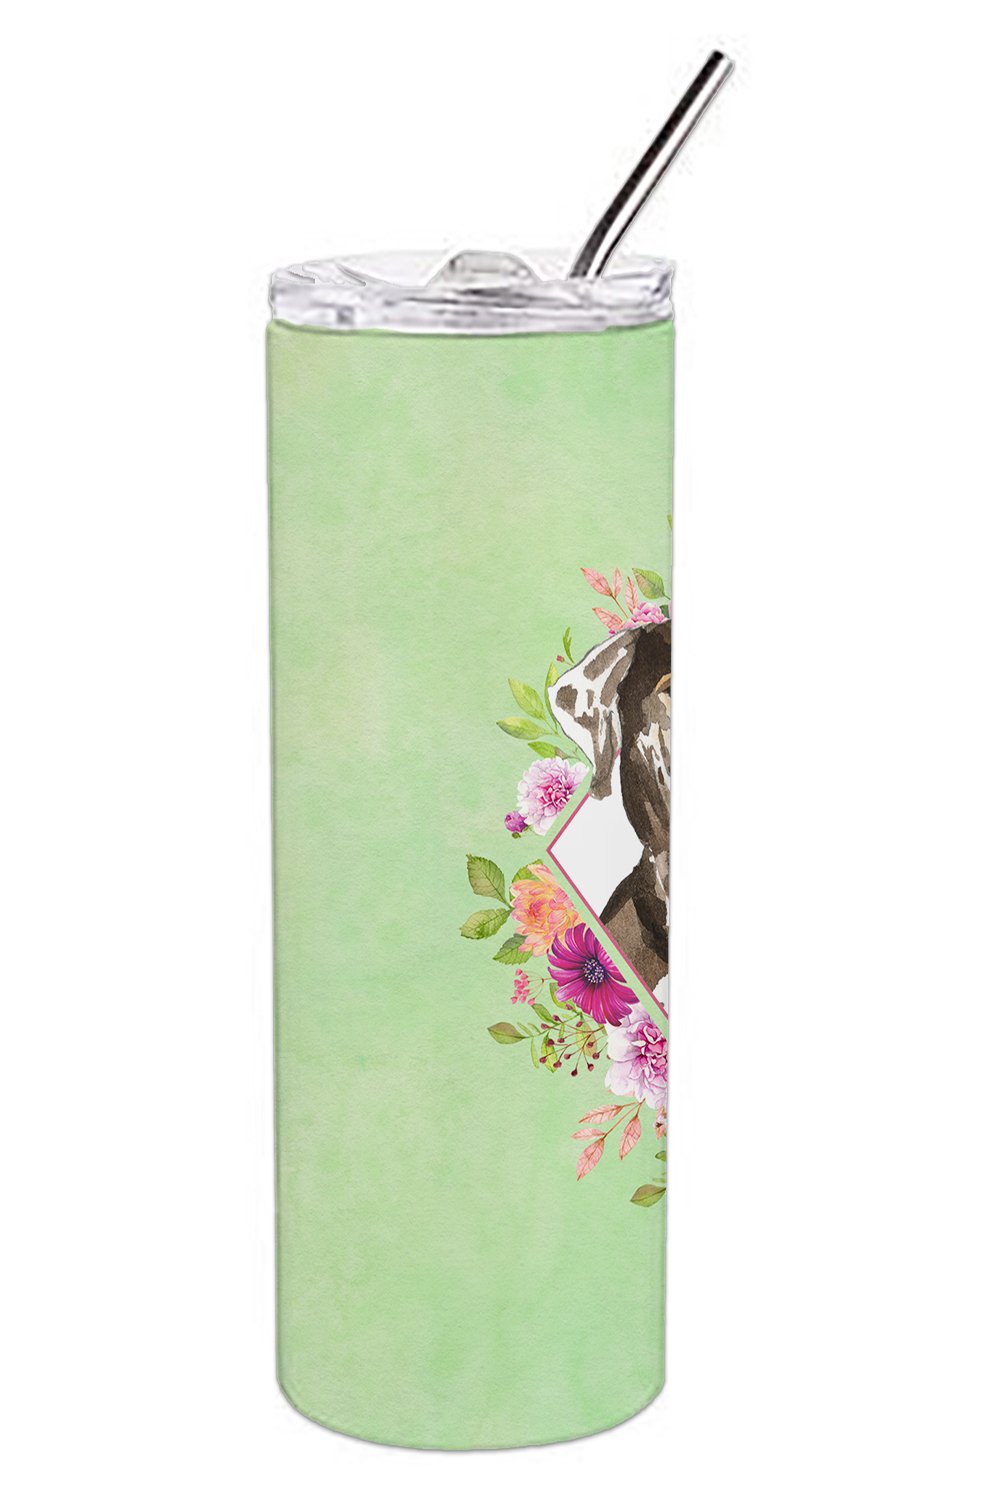 Catahoula Leopard Dog Green Flowers Double Walled Stainless Steel 20 oz Skinny Tumbler CK4409TBL20 by Caroline's Treasures